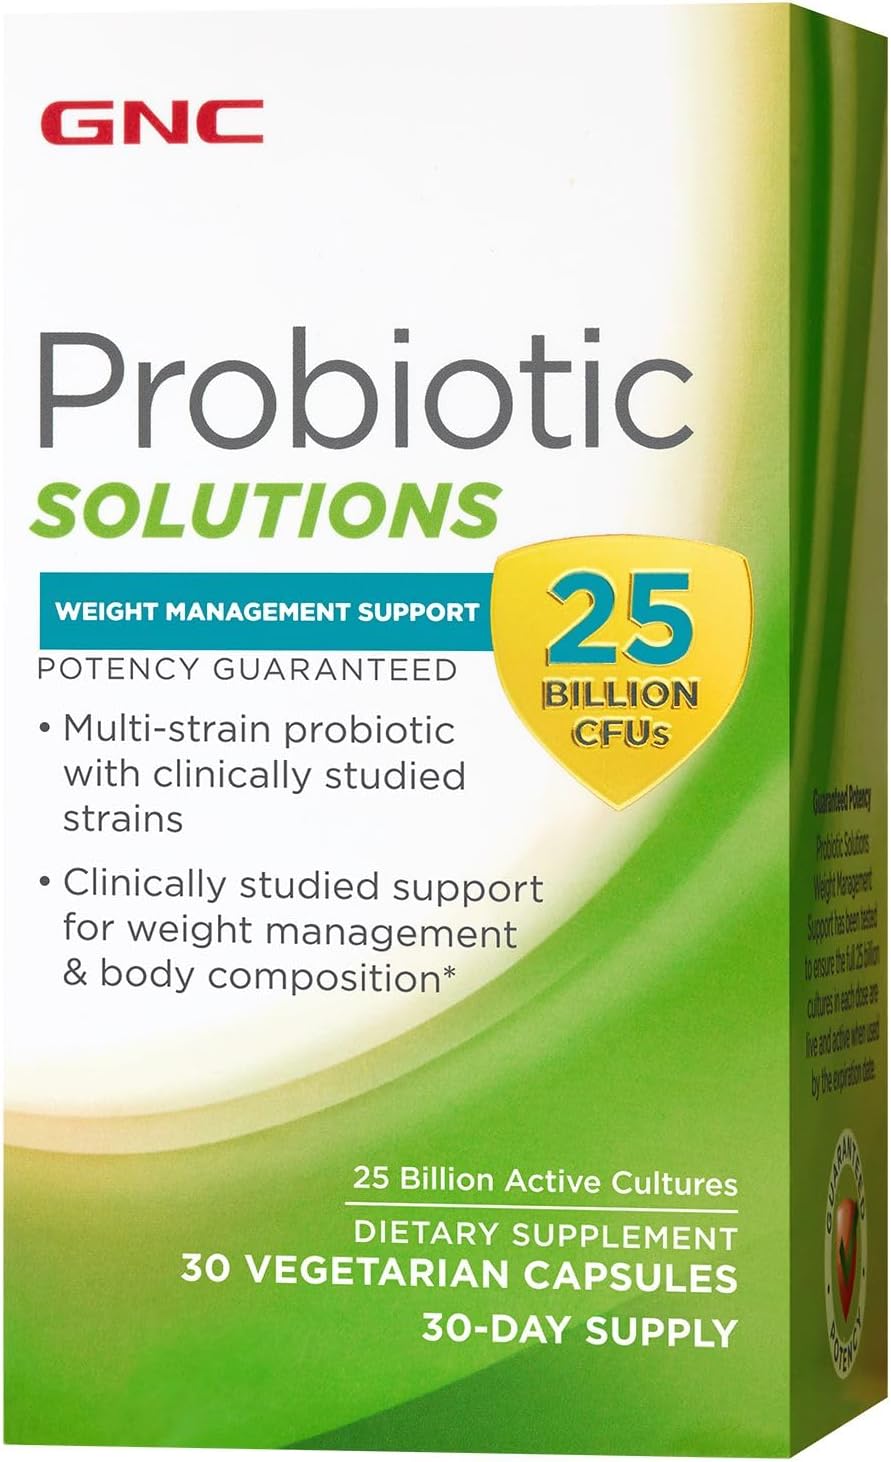 GNC Probiotic Solutions Weight Management Support with 25 Billion CFUs | Contains Clinically Studied